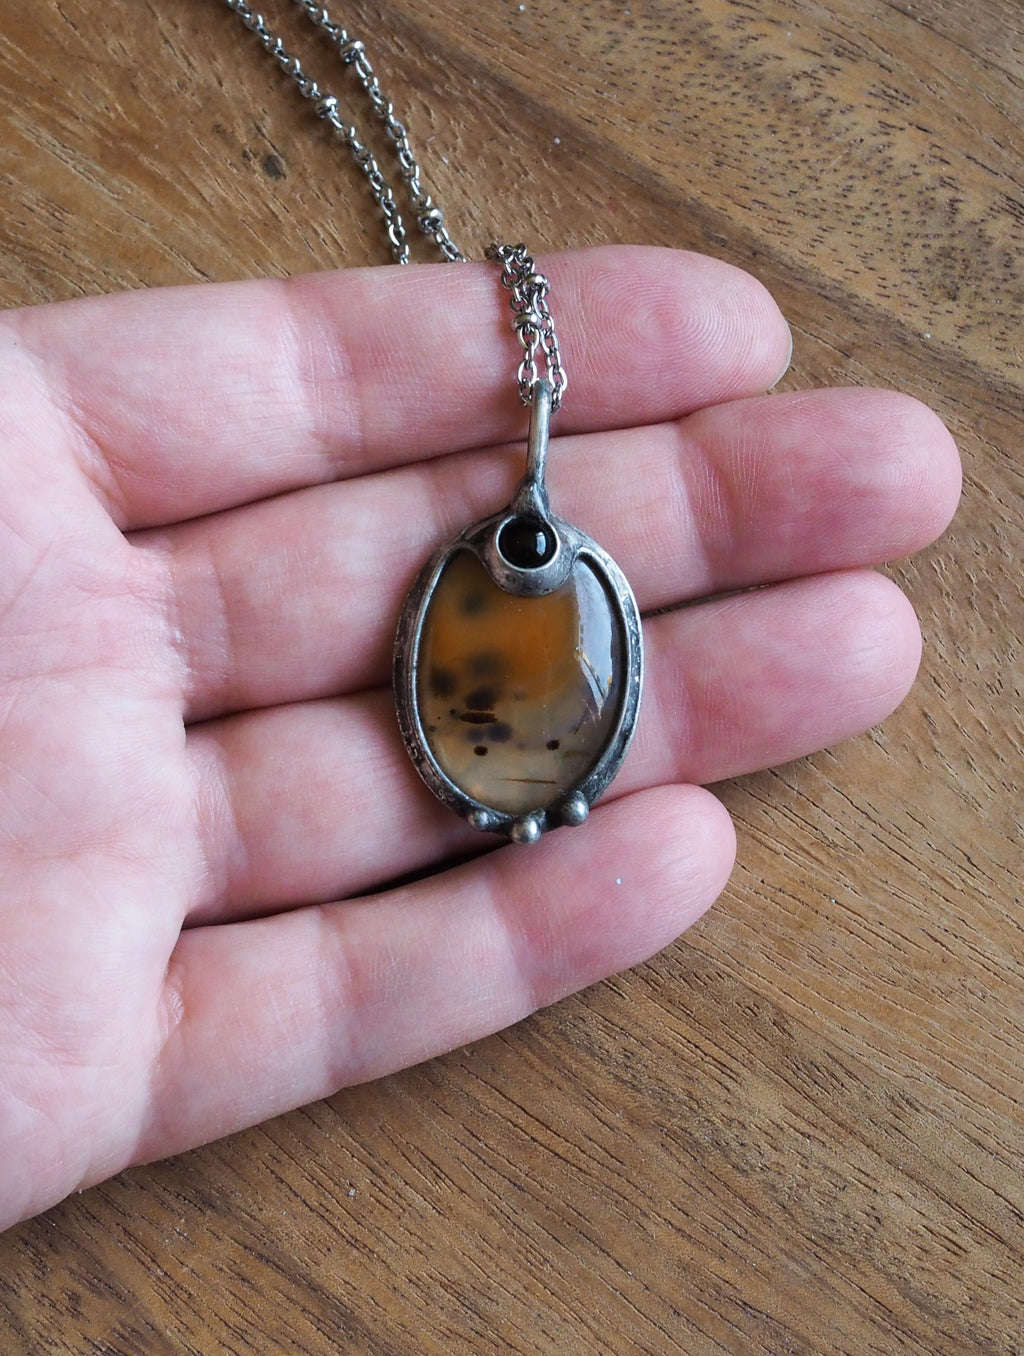 orange crystal talisman necklace in palm of hand